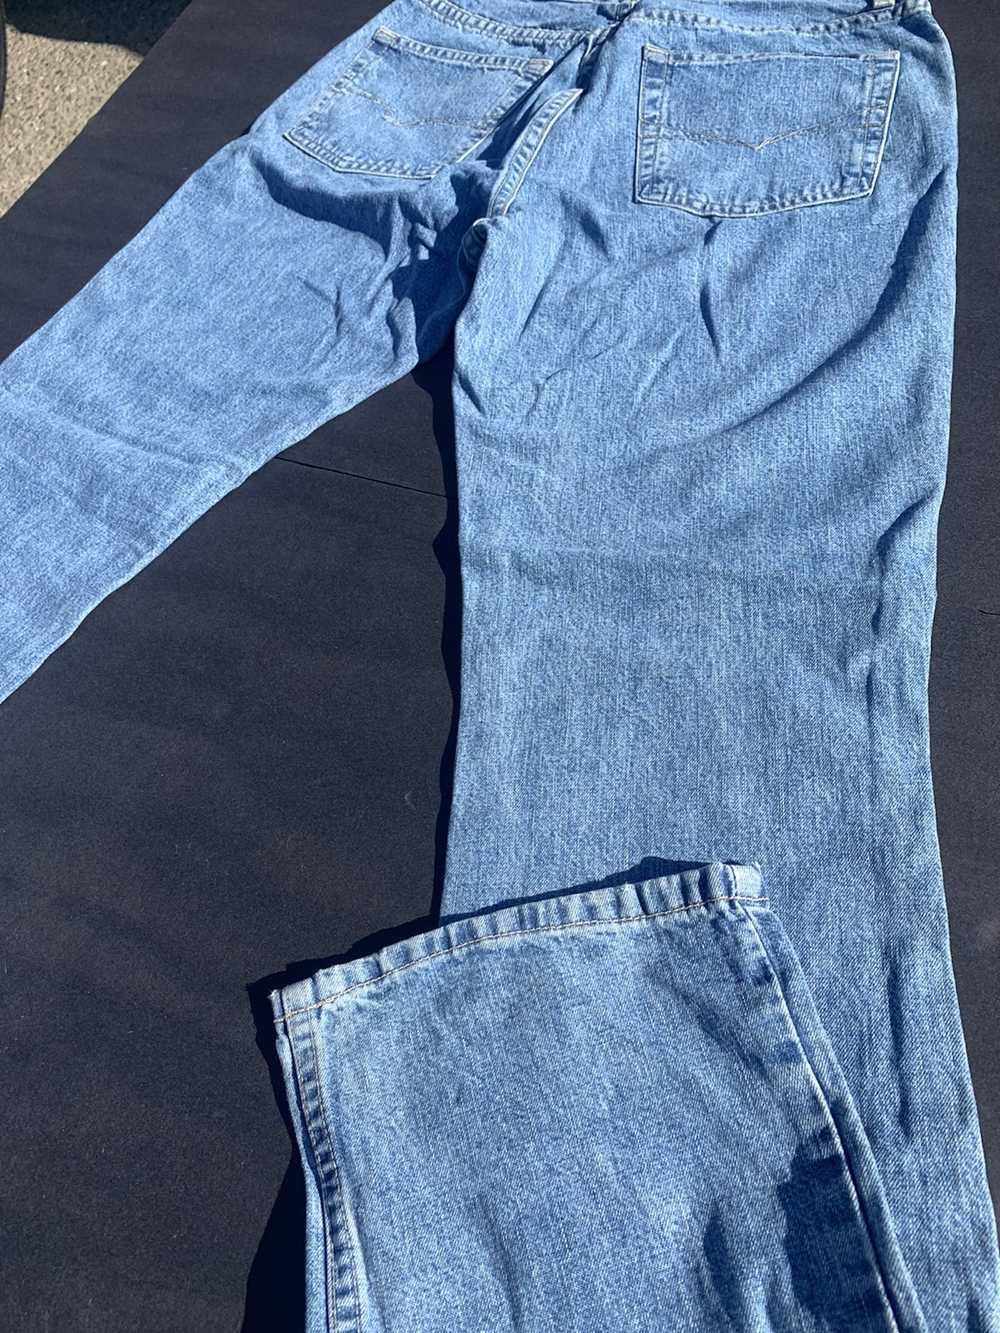 Guess Vintage guess denim jeans 90s made in USA - image 5